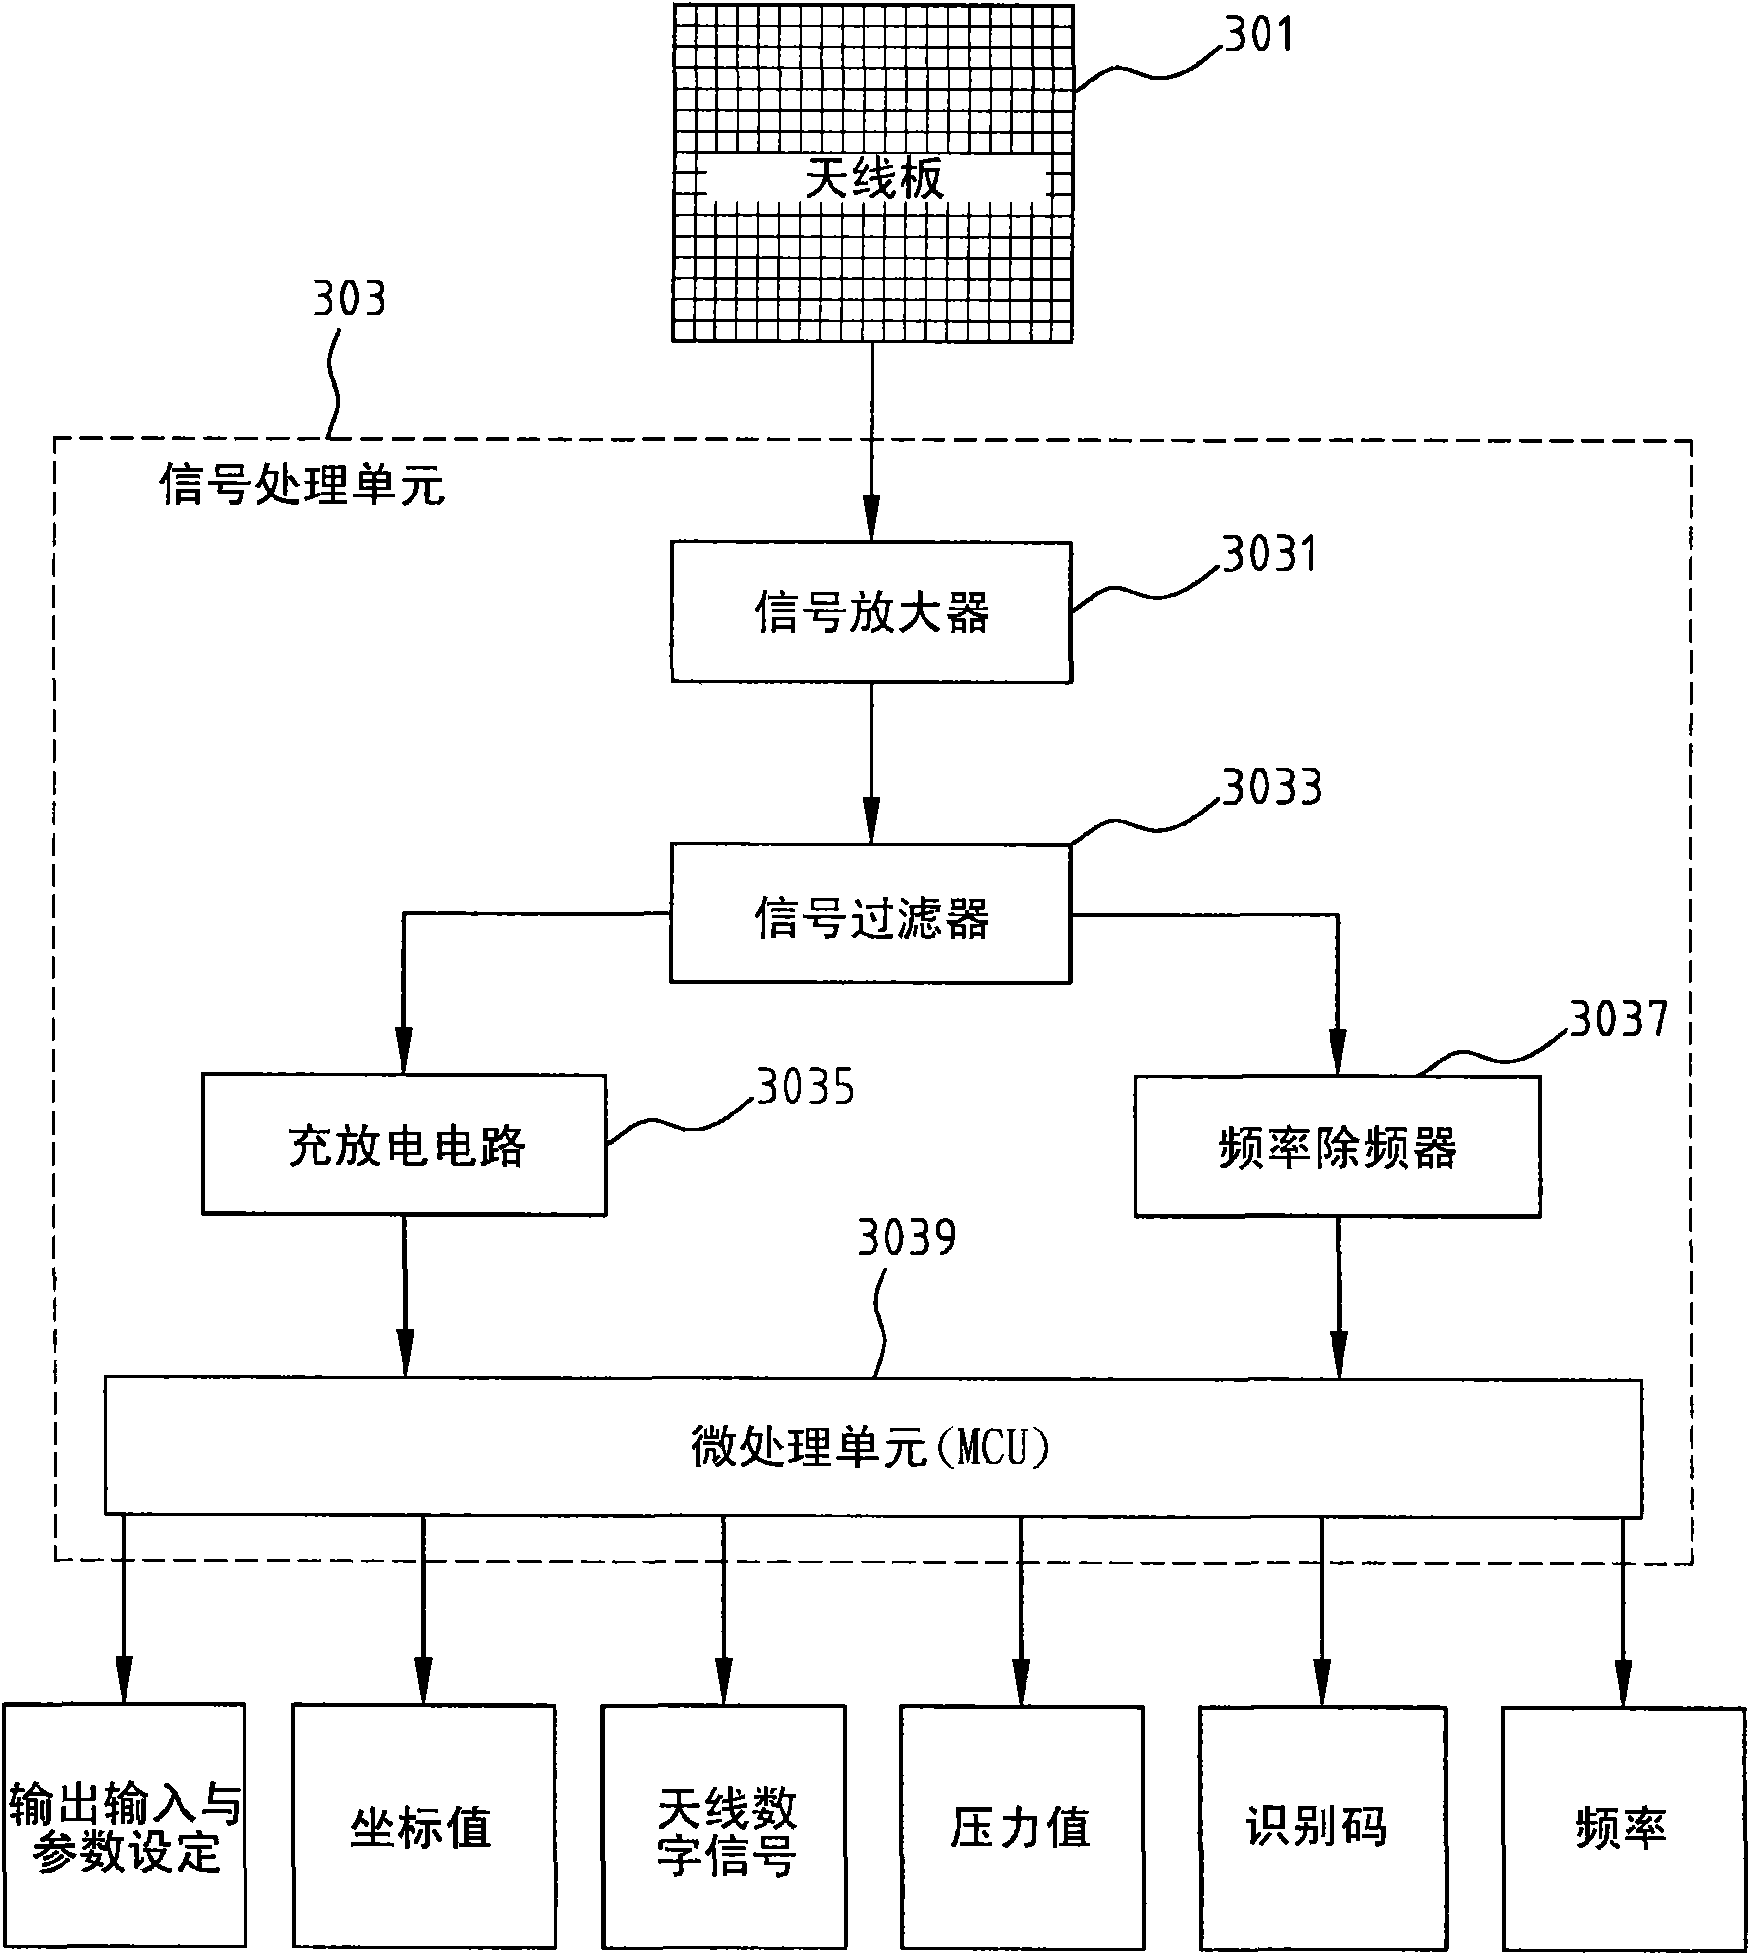 Antenna signal processing device with a plurality of processing units